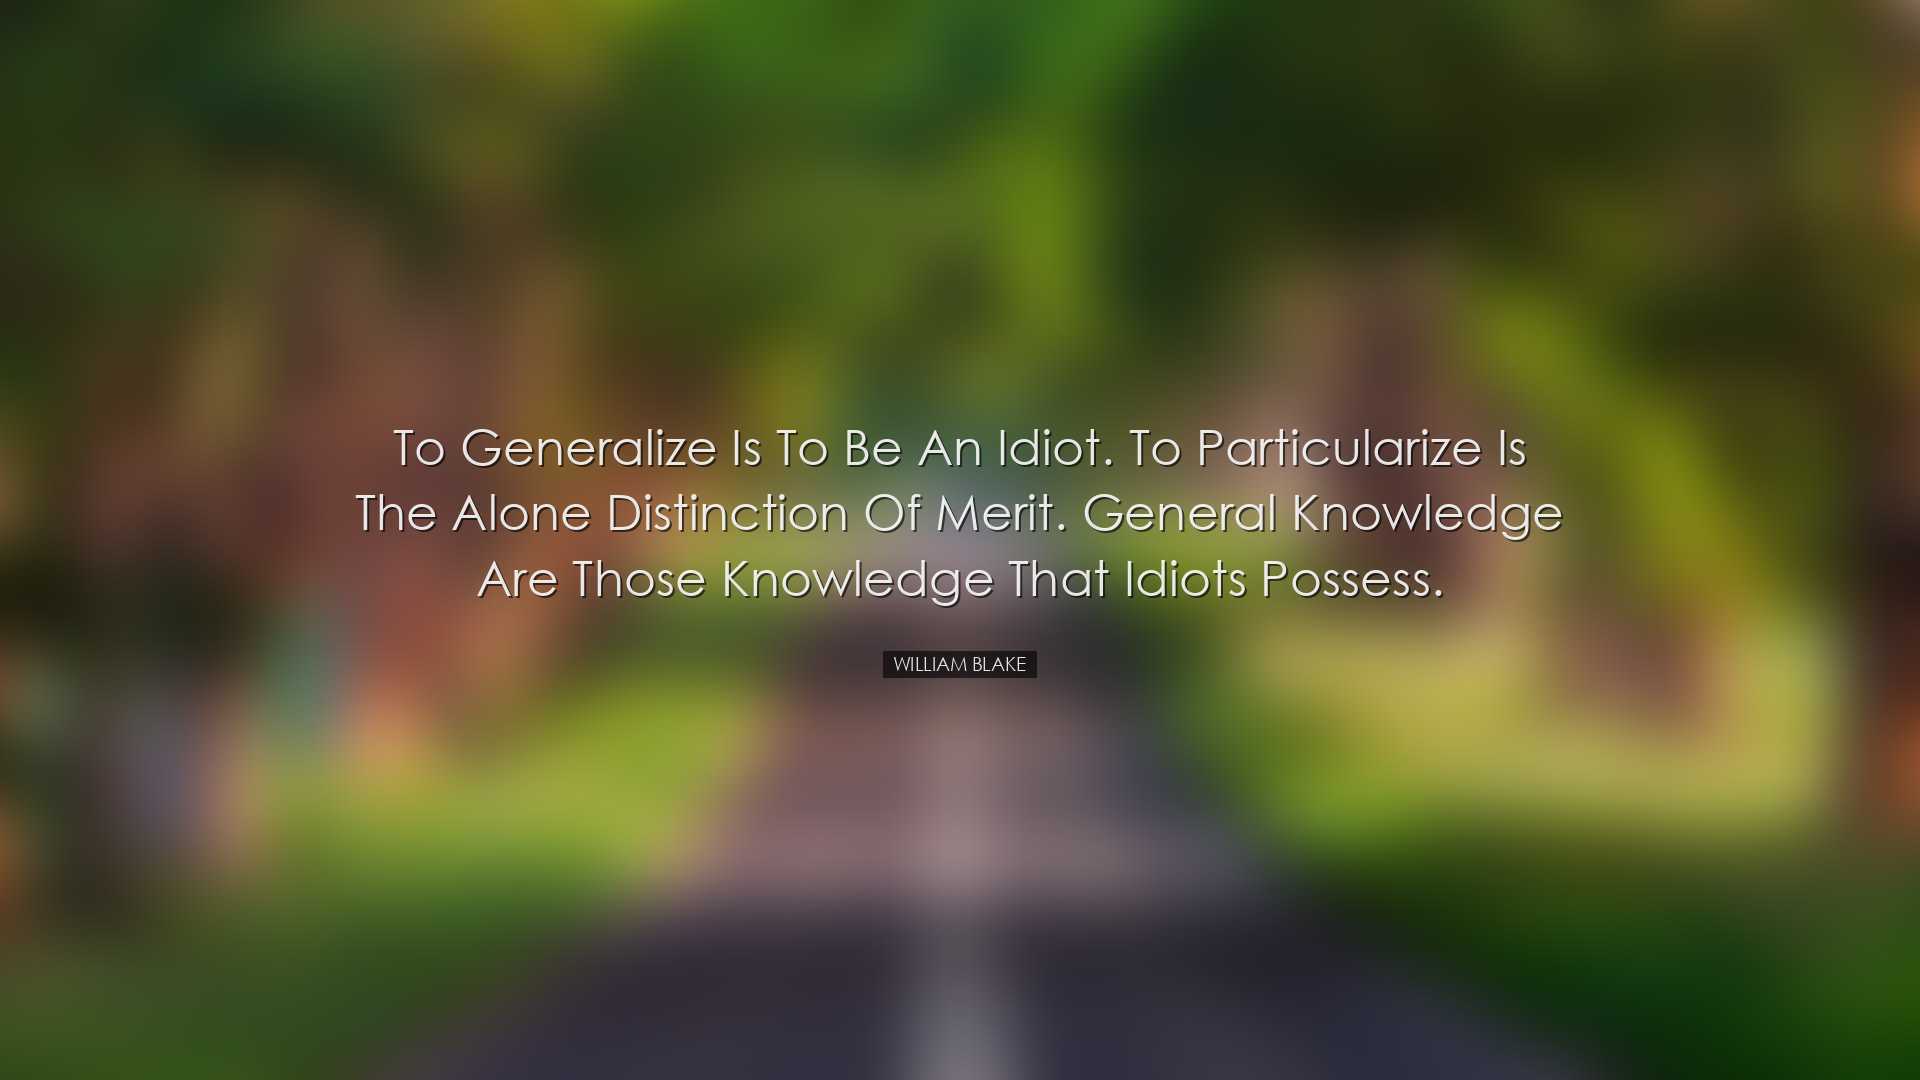 To generalize is to be an idiot. To particularize is the alone dis